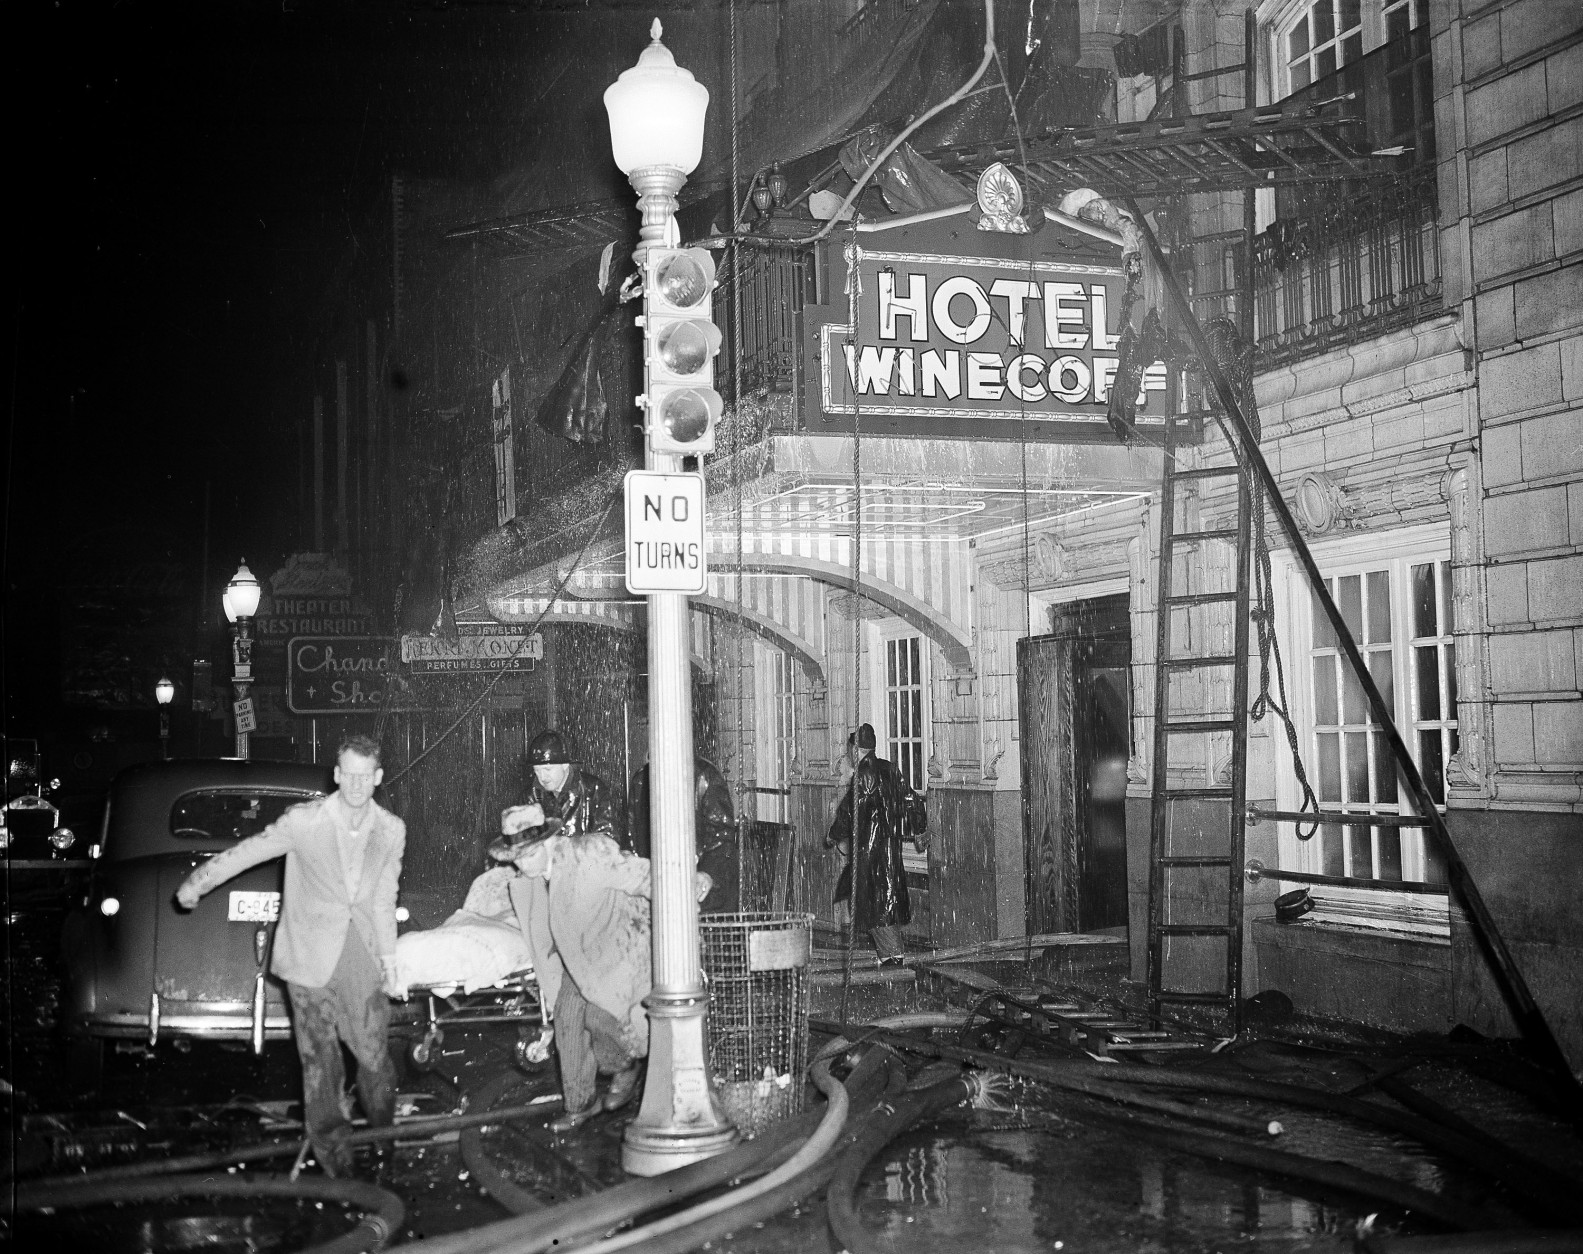 Rescue workers carry an unidentified victim from the still-blazing Winecoff Hotel in Atlanta, Ga., Dec. 7, 1946.  Officials estimate that over a hundred may be dead.  (AP Photo)